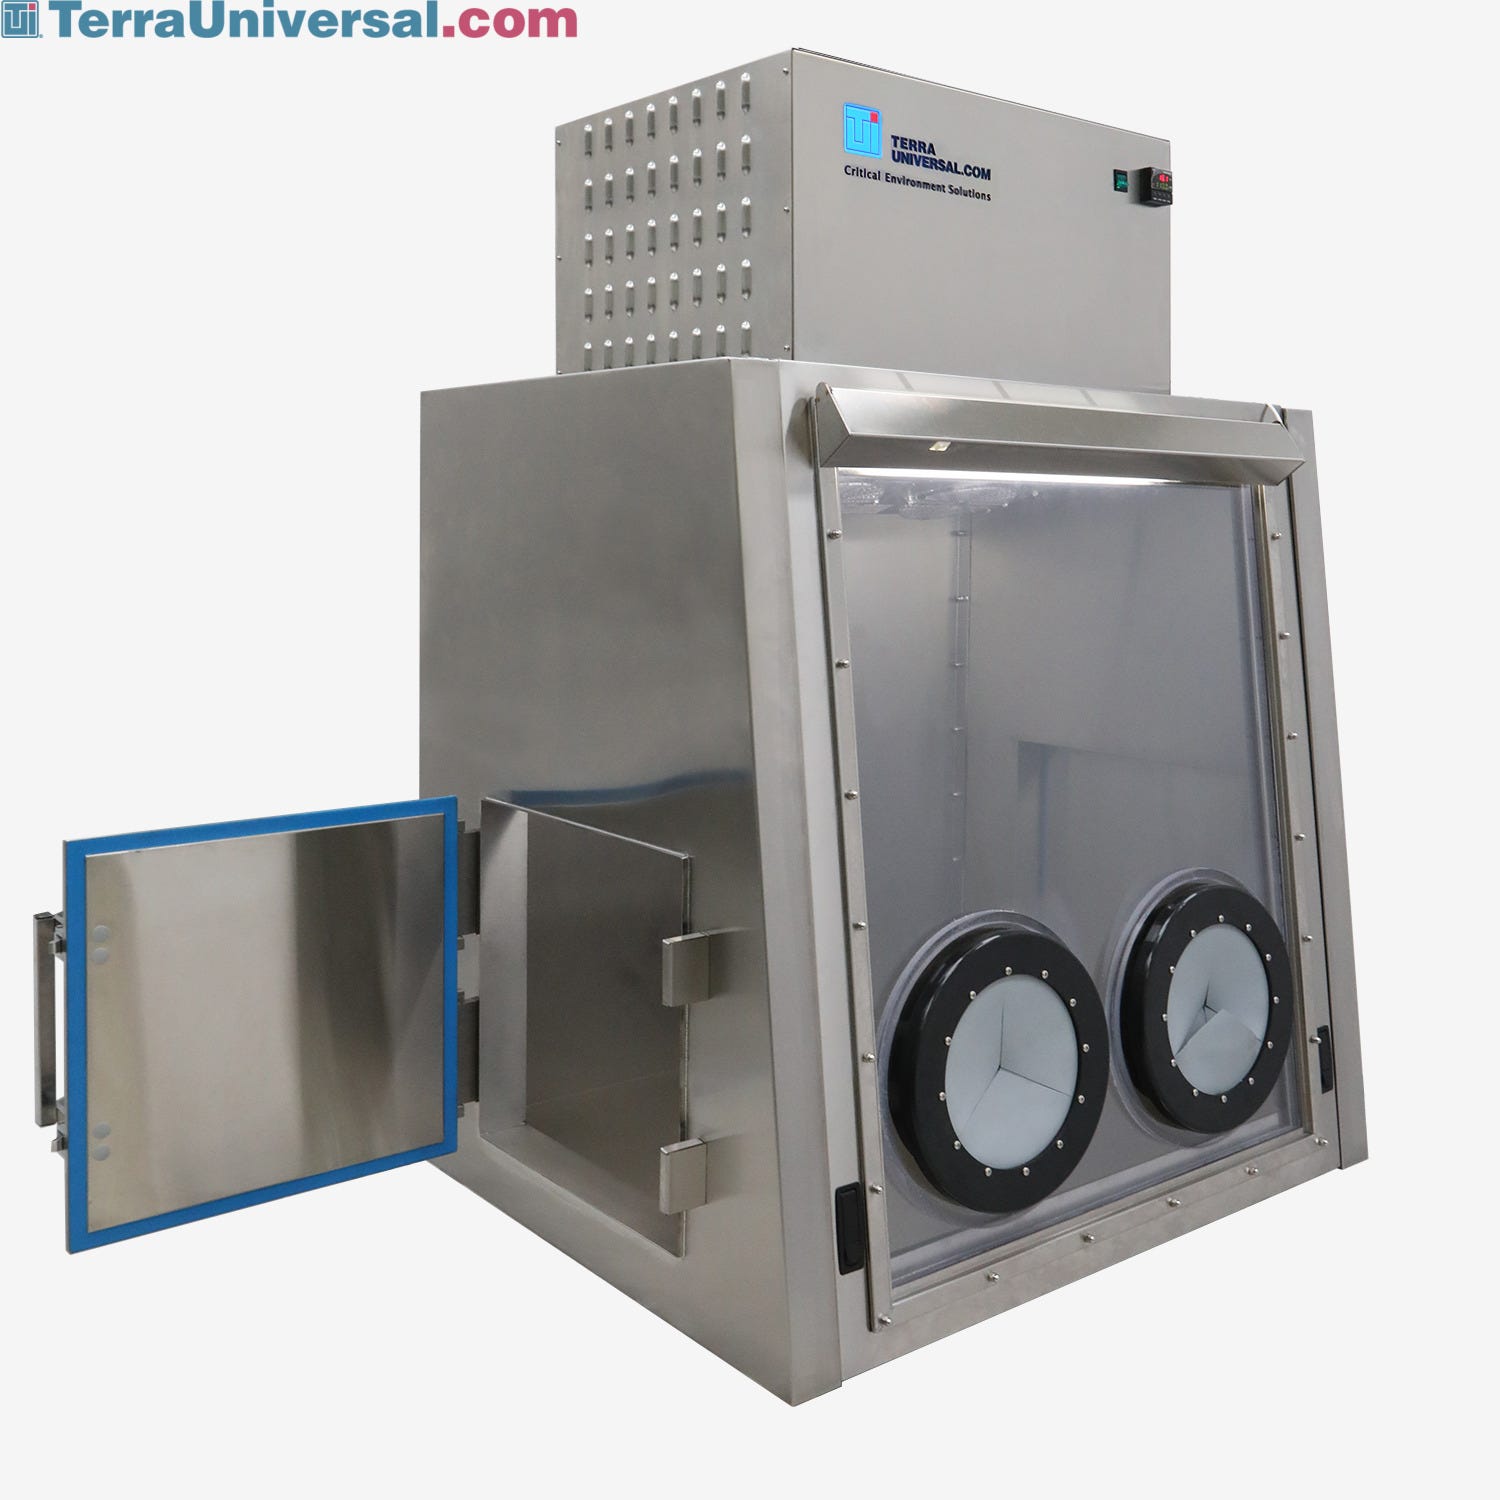 Freezer for Glove Boxes and Isolators